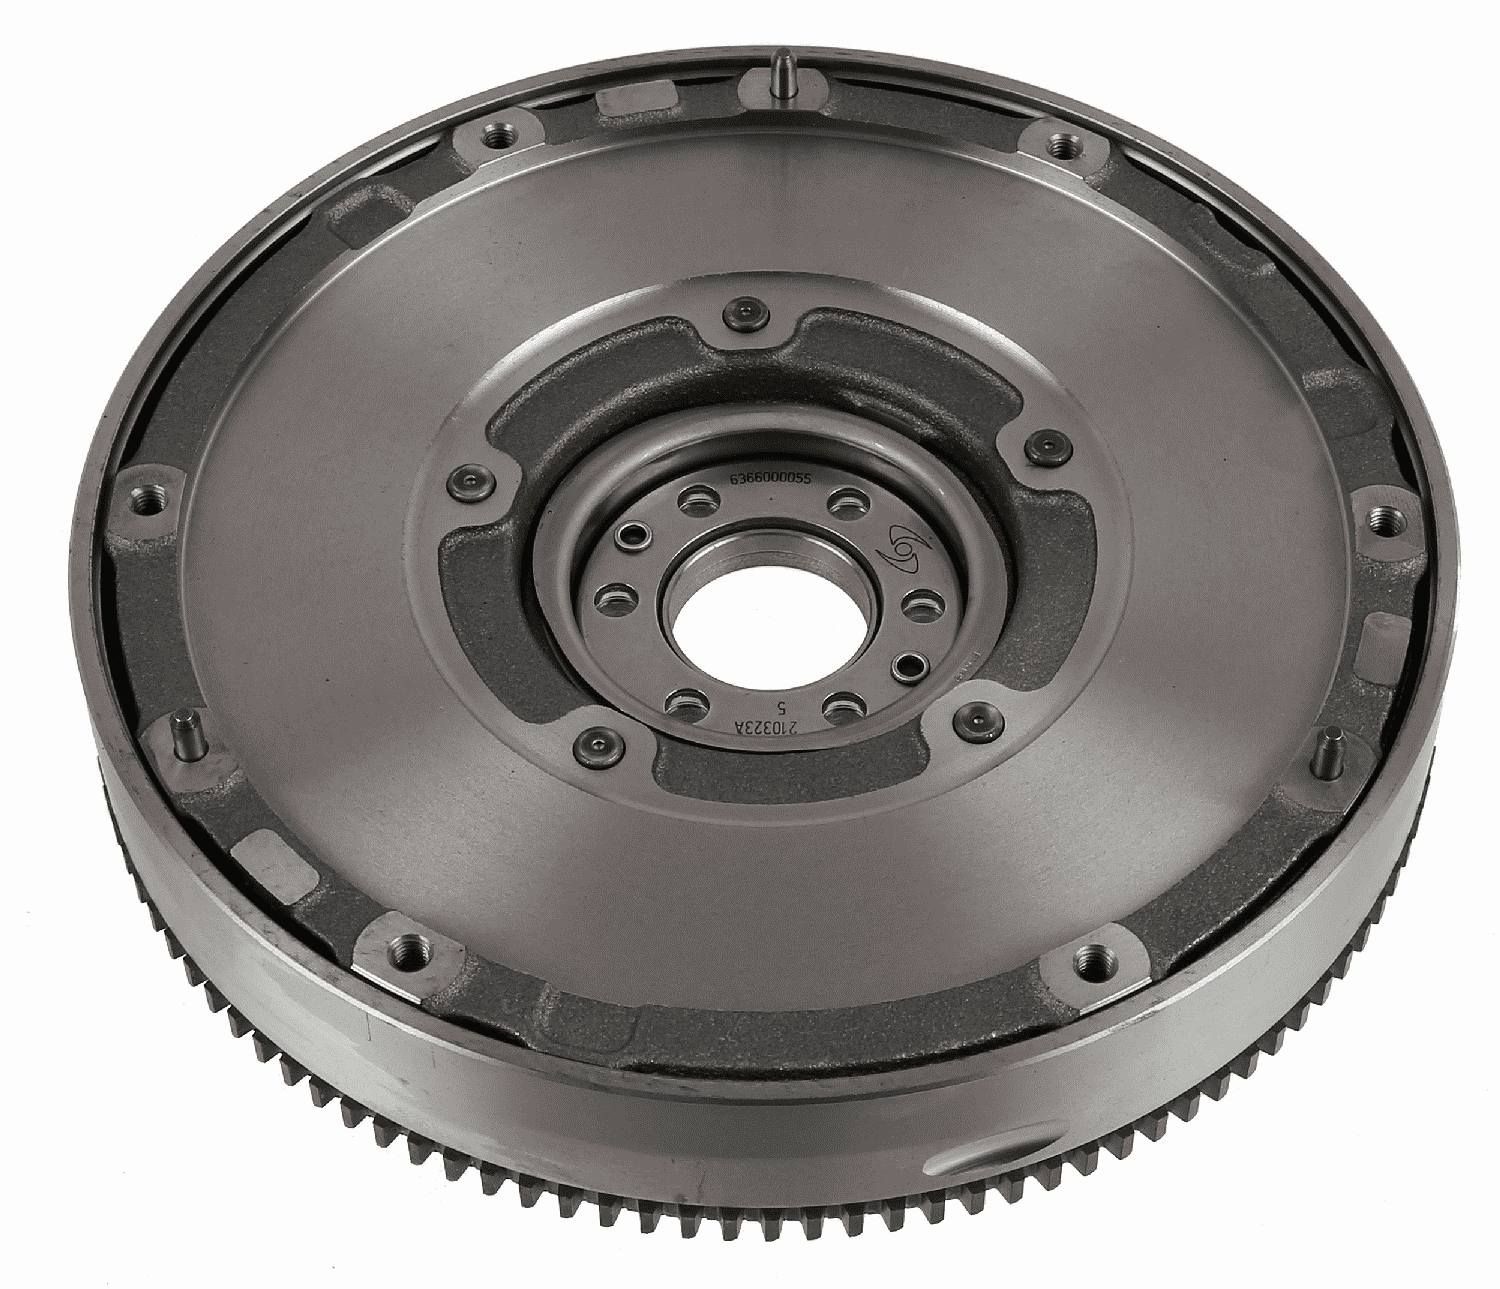 Clutch flywheel 6366 000 055 Ford FOCUS 2021 – buy replacement parts